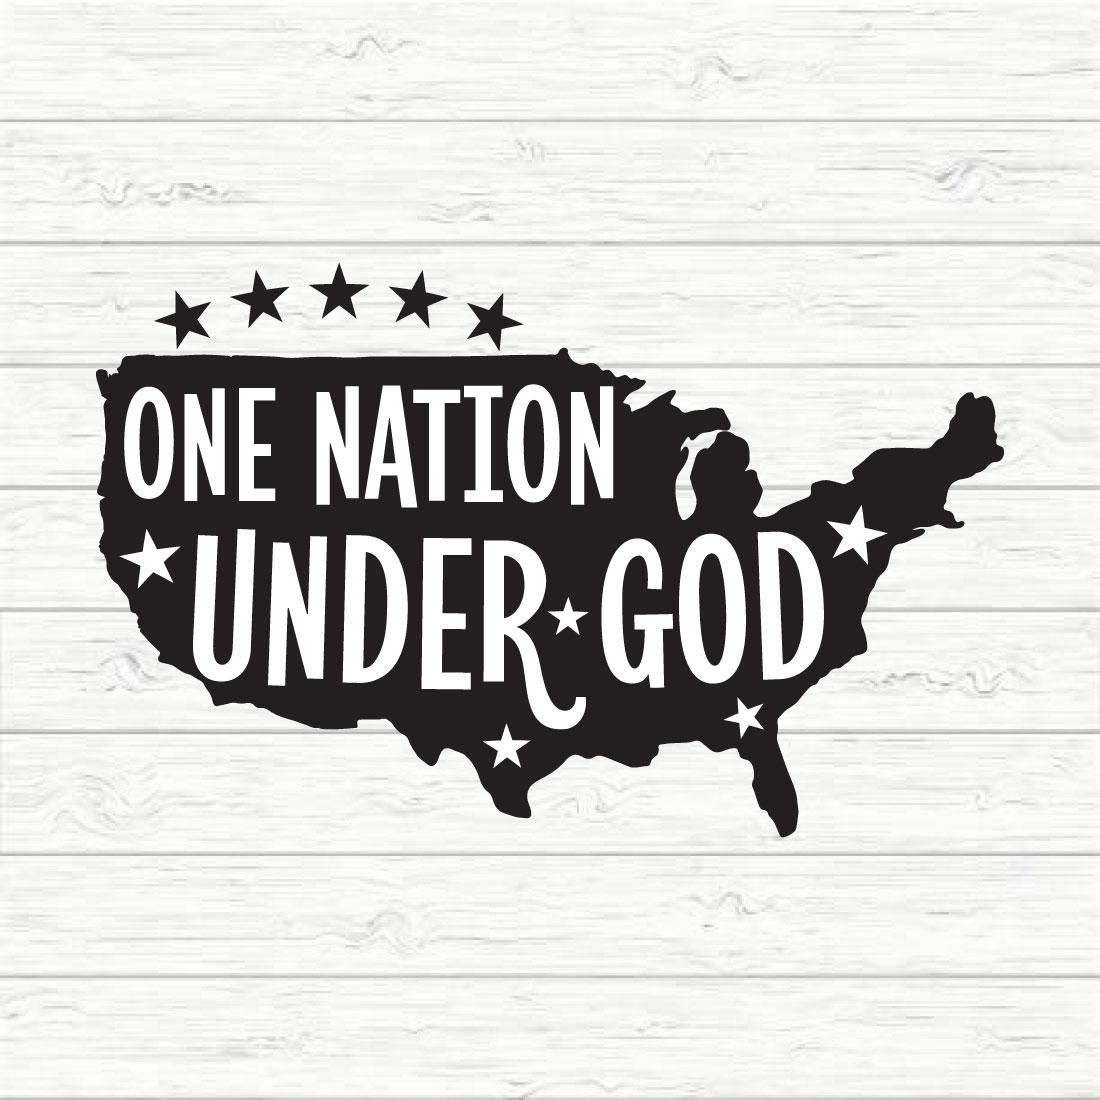 One Nation Under God preview image.